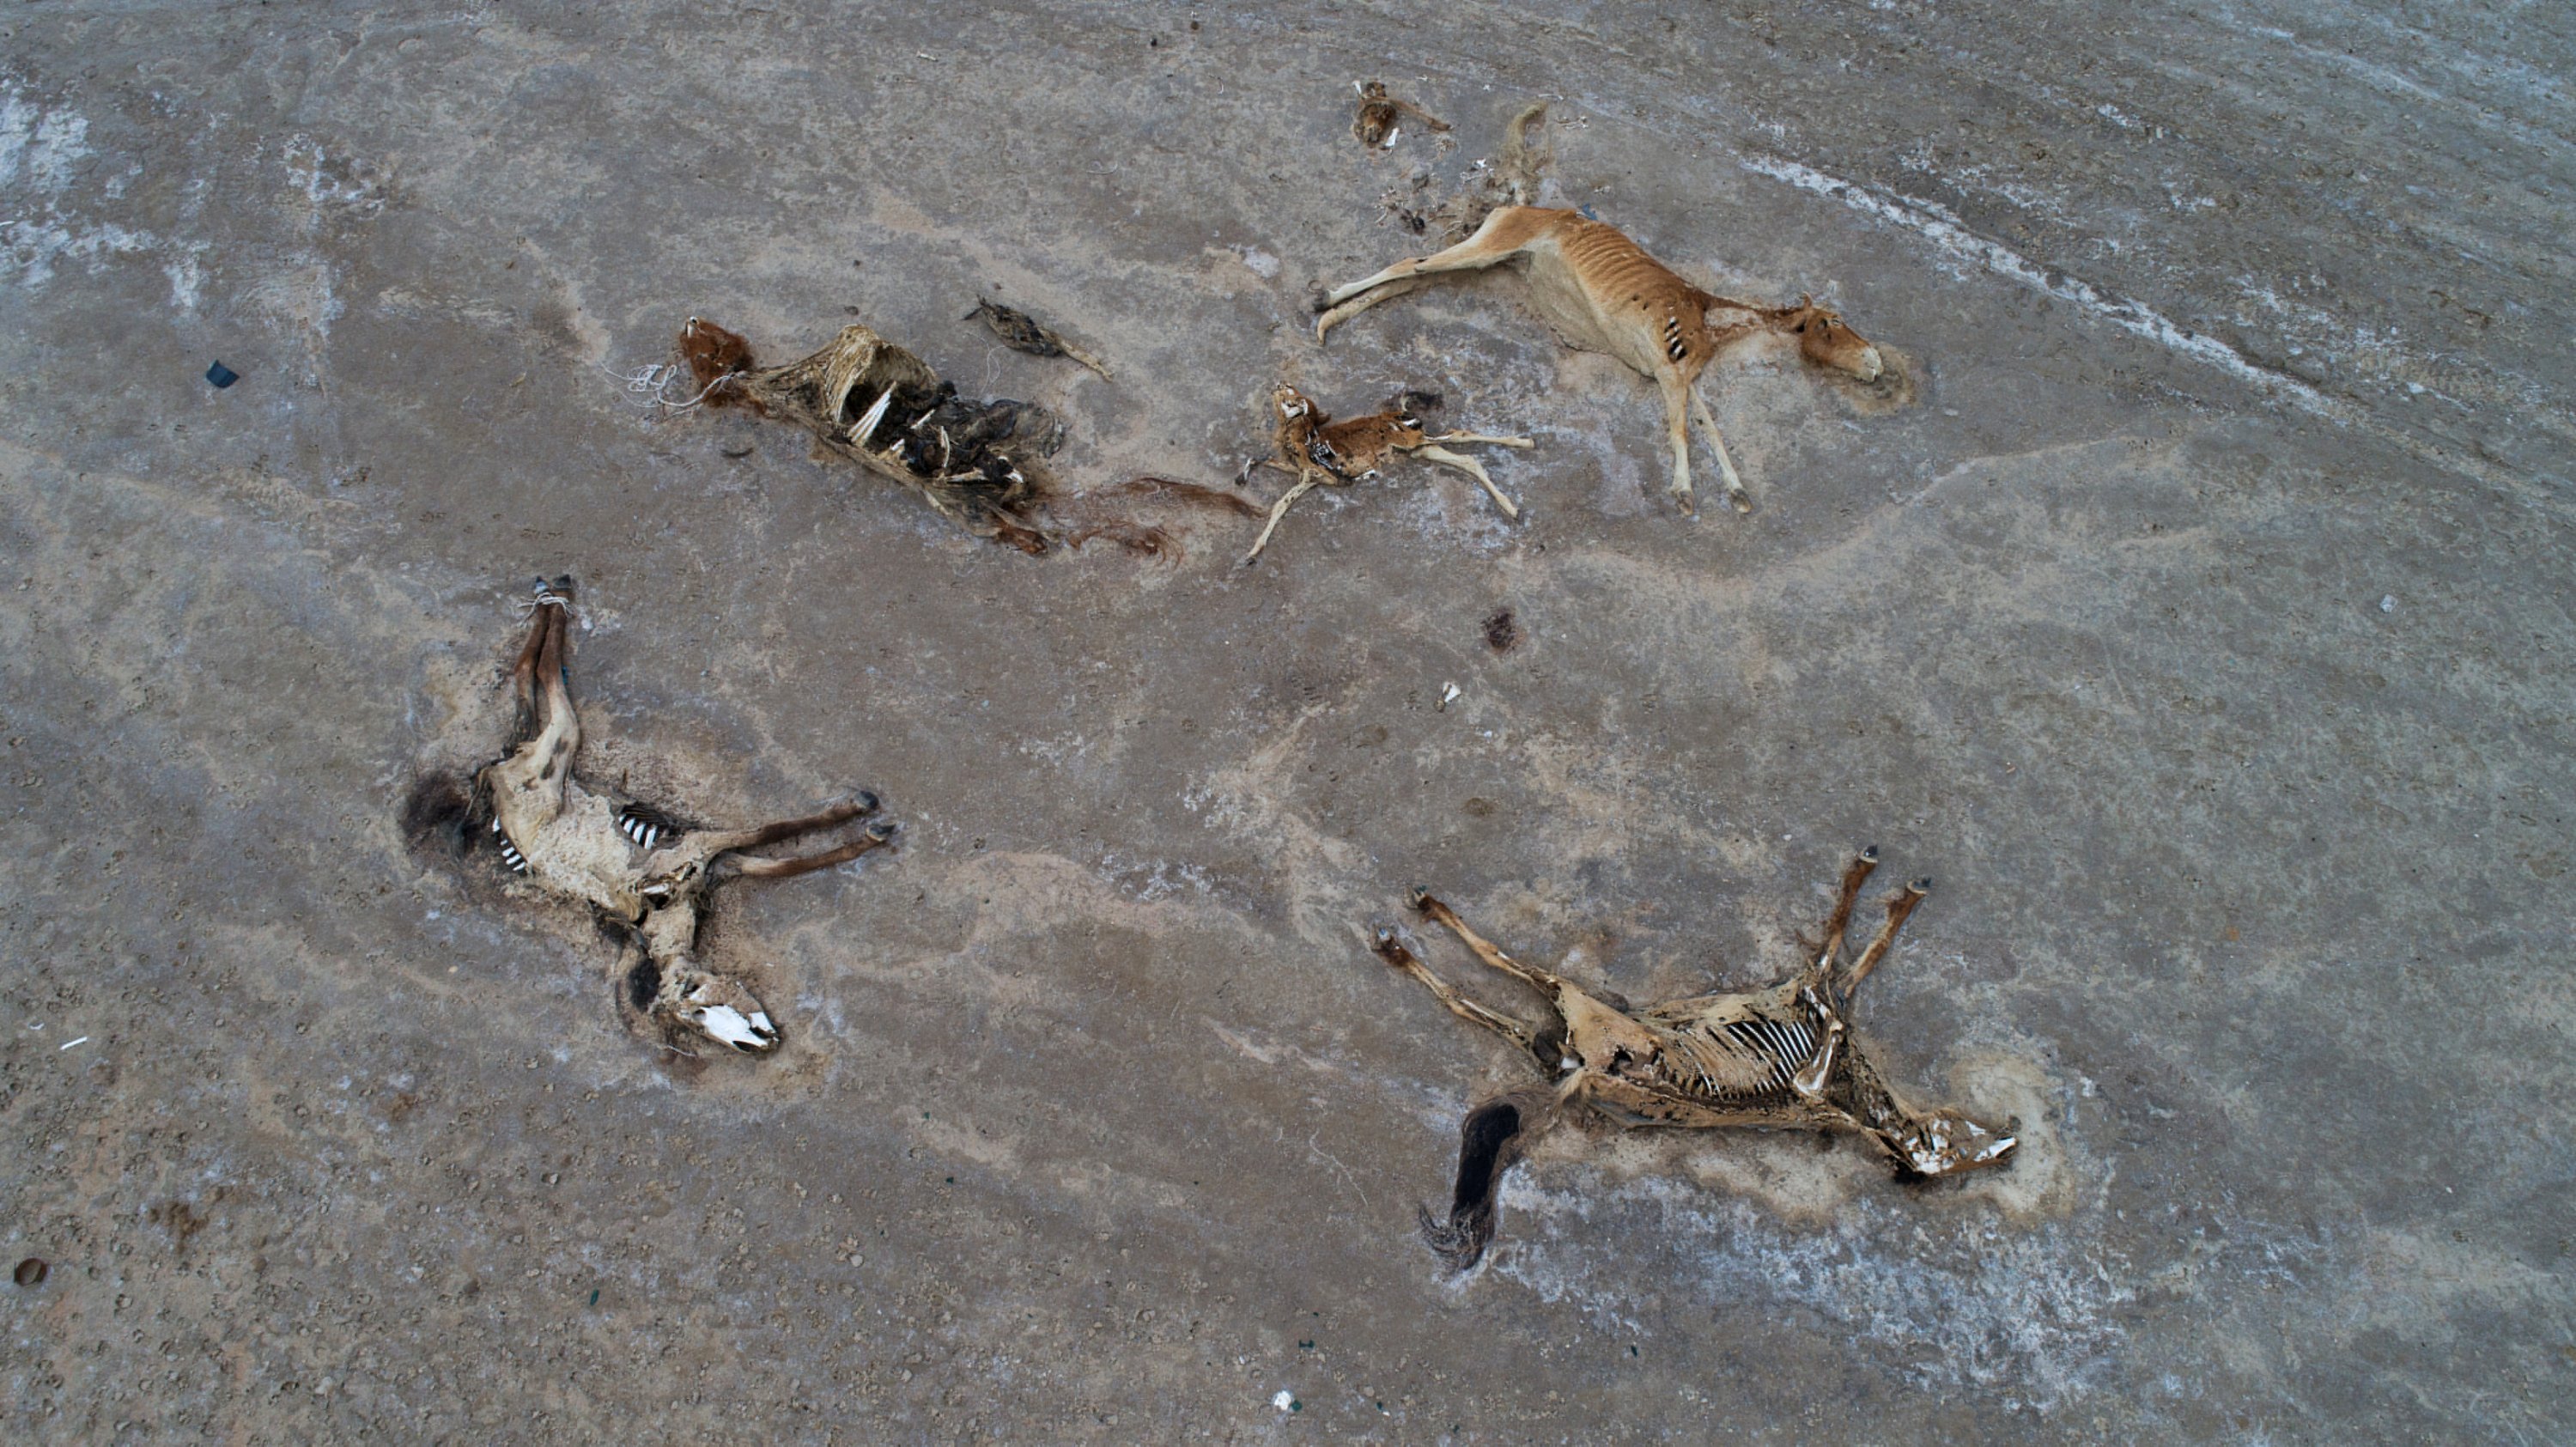 Carcasses of animals lie on the ground outside the village of Tushchykudyk amid severe drought in Mangistau Region, on Kazakhstan, on July 27, 2021. (Reuters Photo)